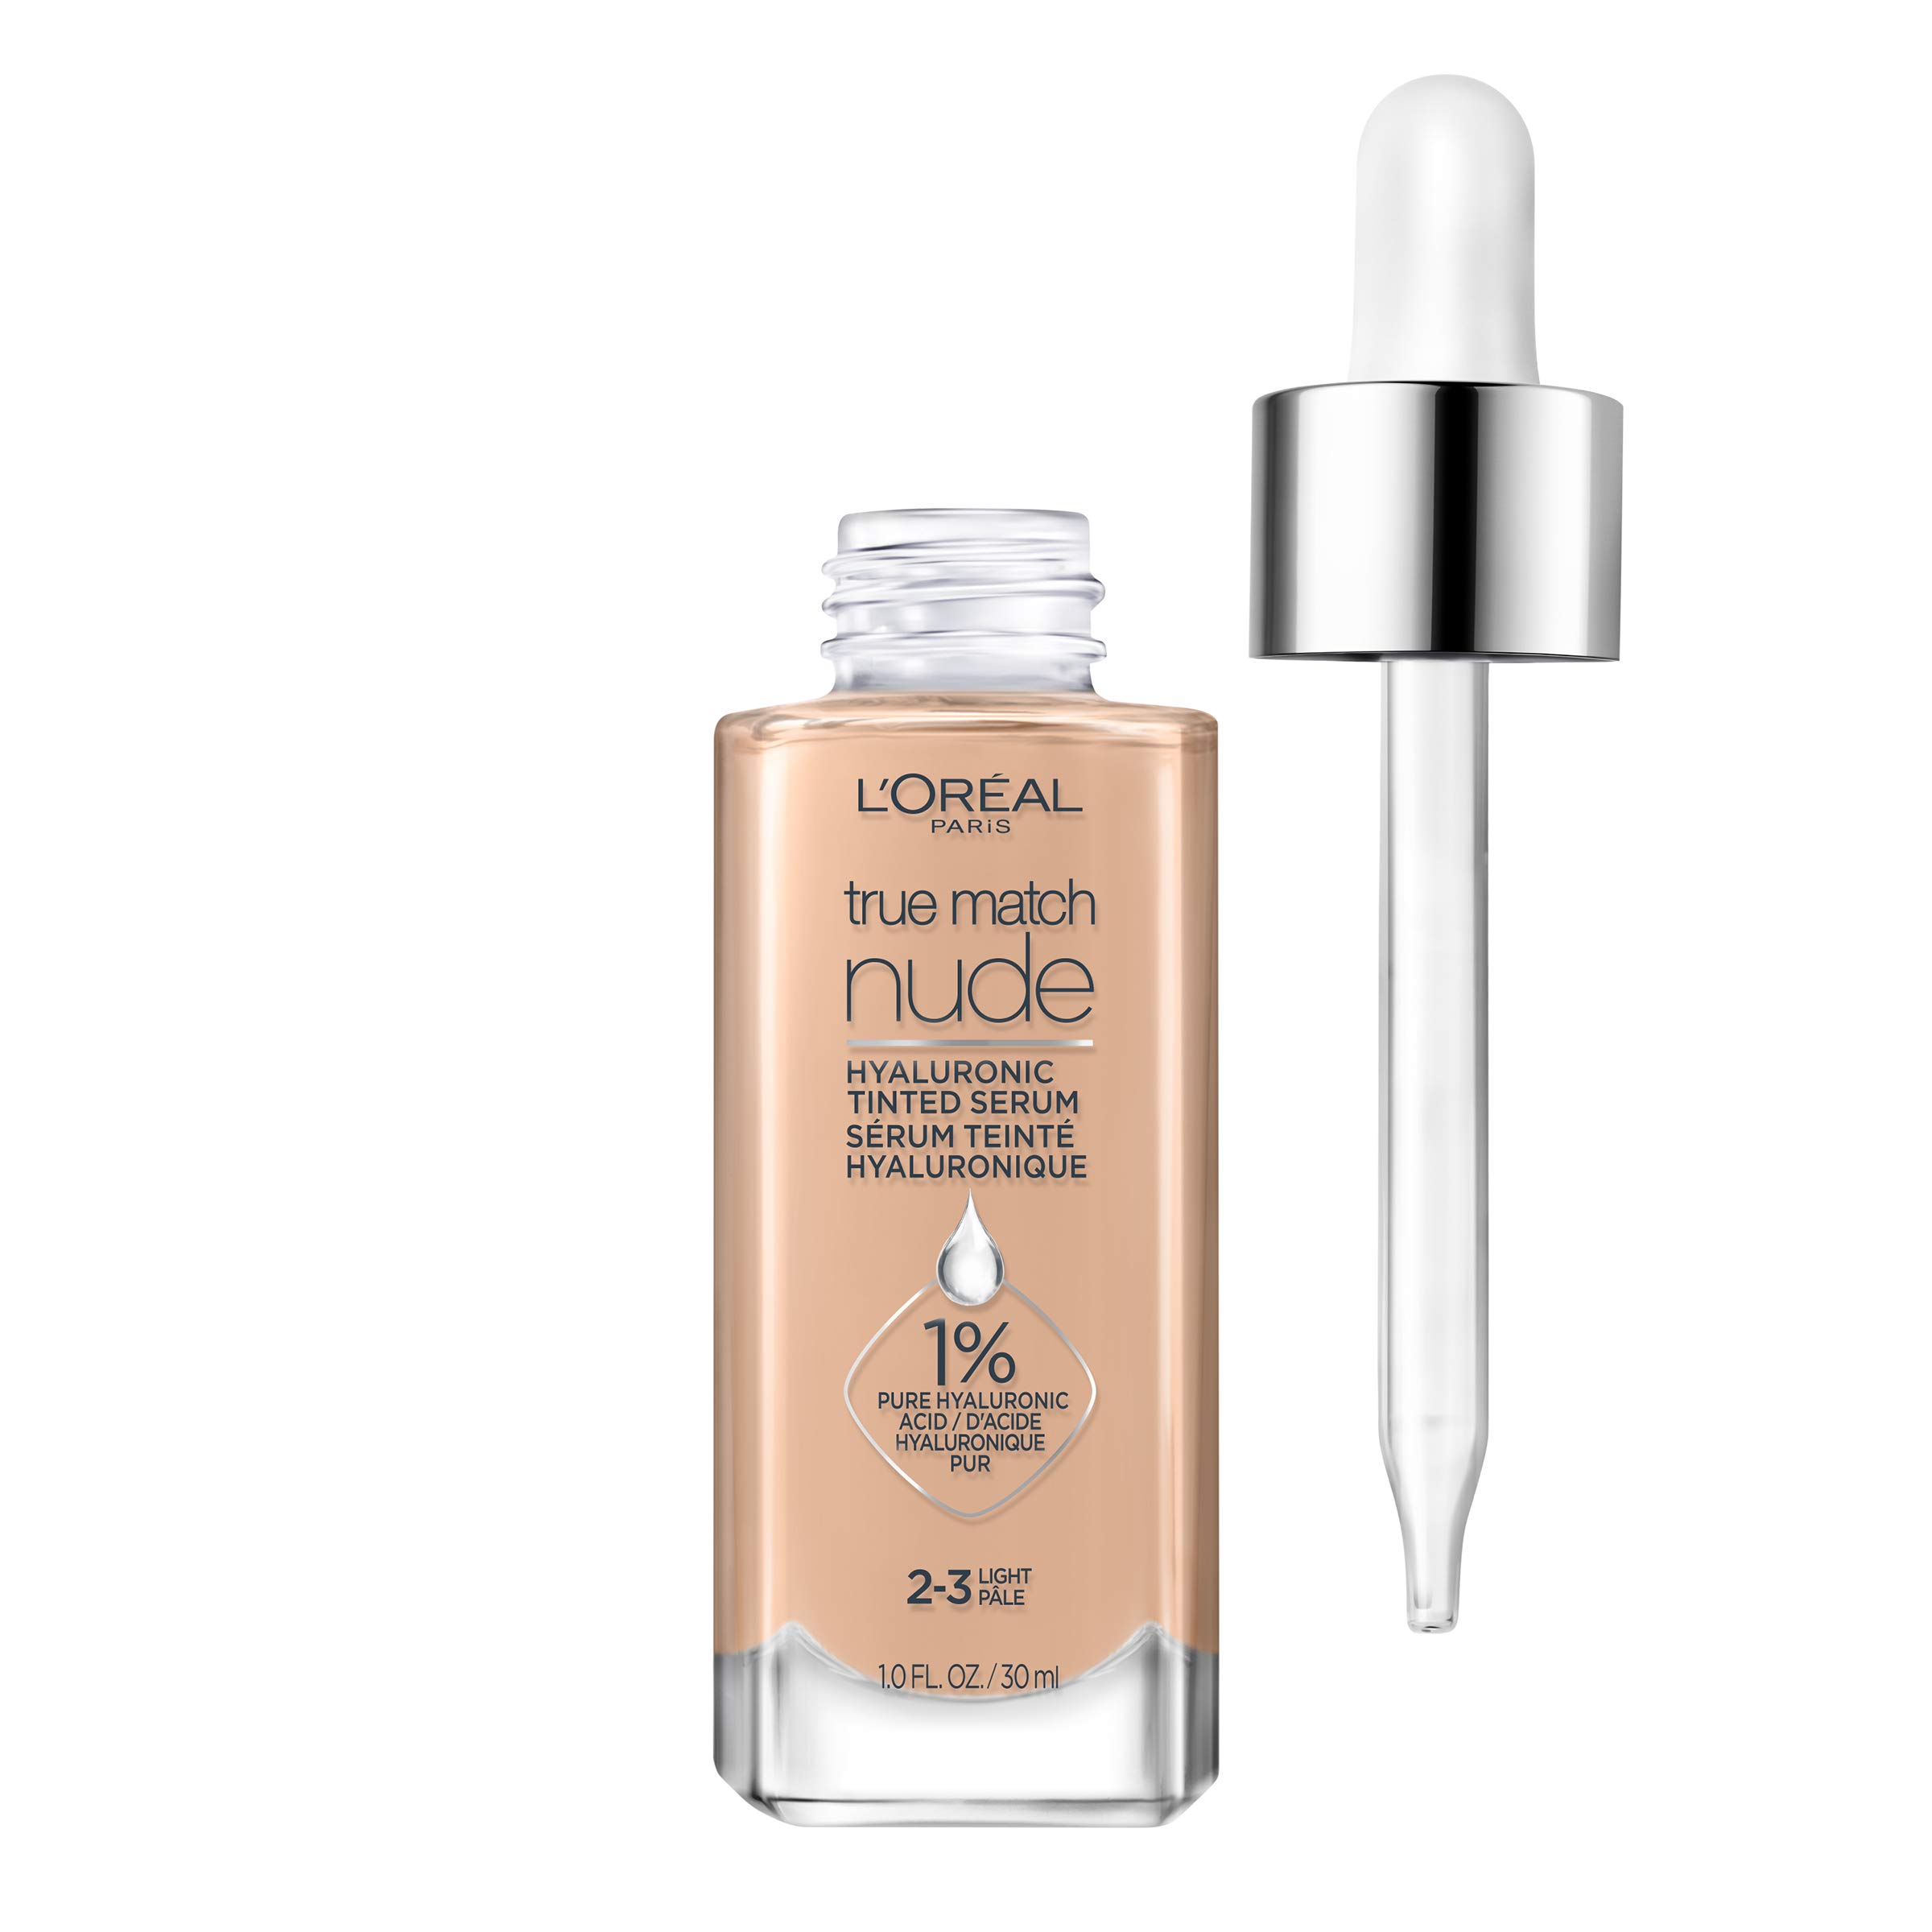 L’Oréal Paris True Match Nude Hyaluronic Tinted Serum Foundation with 1% Hyaluronic acid, Light 2-3, 1 fl. oz.